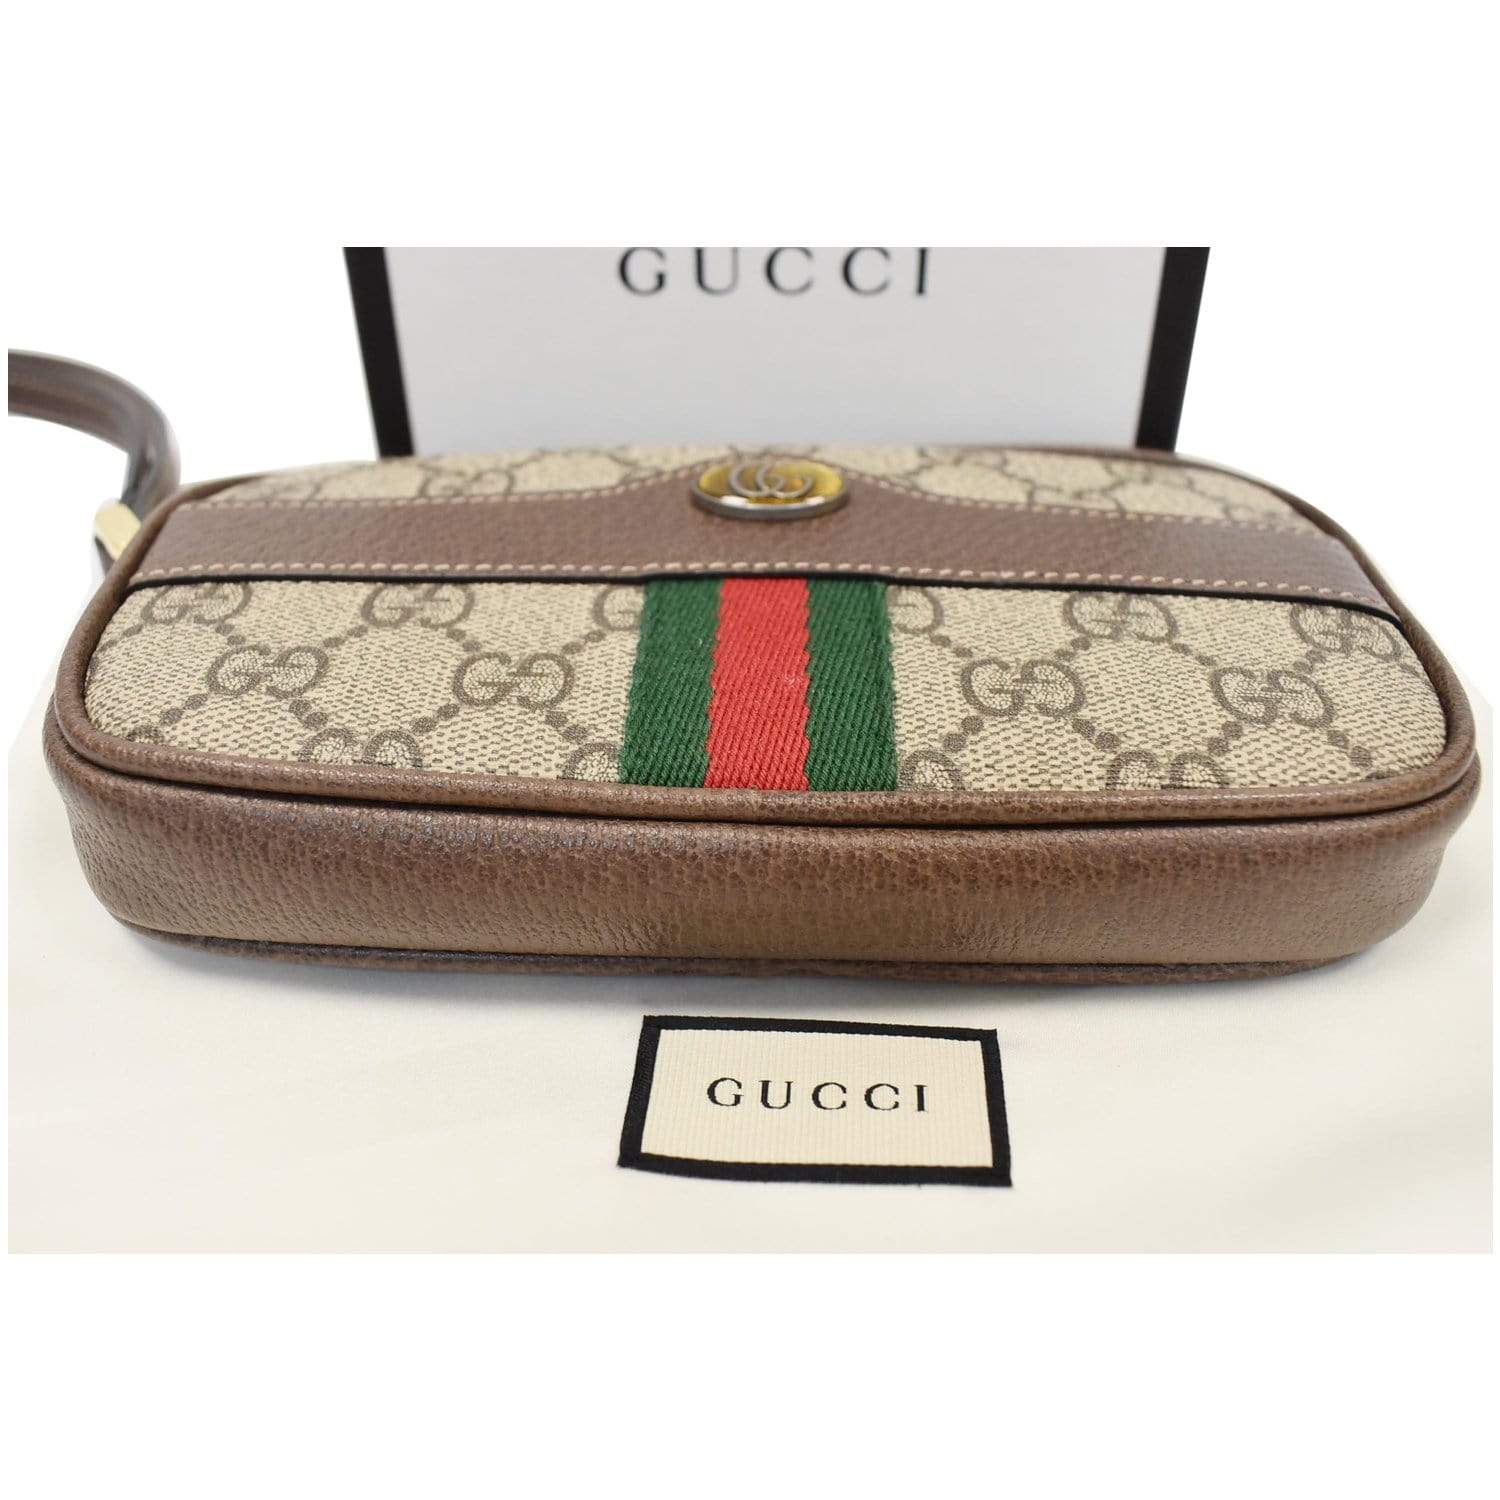 Gucci Ophidia GG Supreme ID holder - Brown Keychains, Accessories -  GUC411901